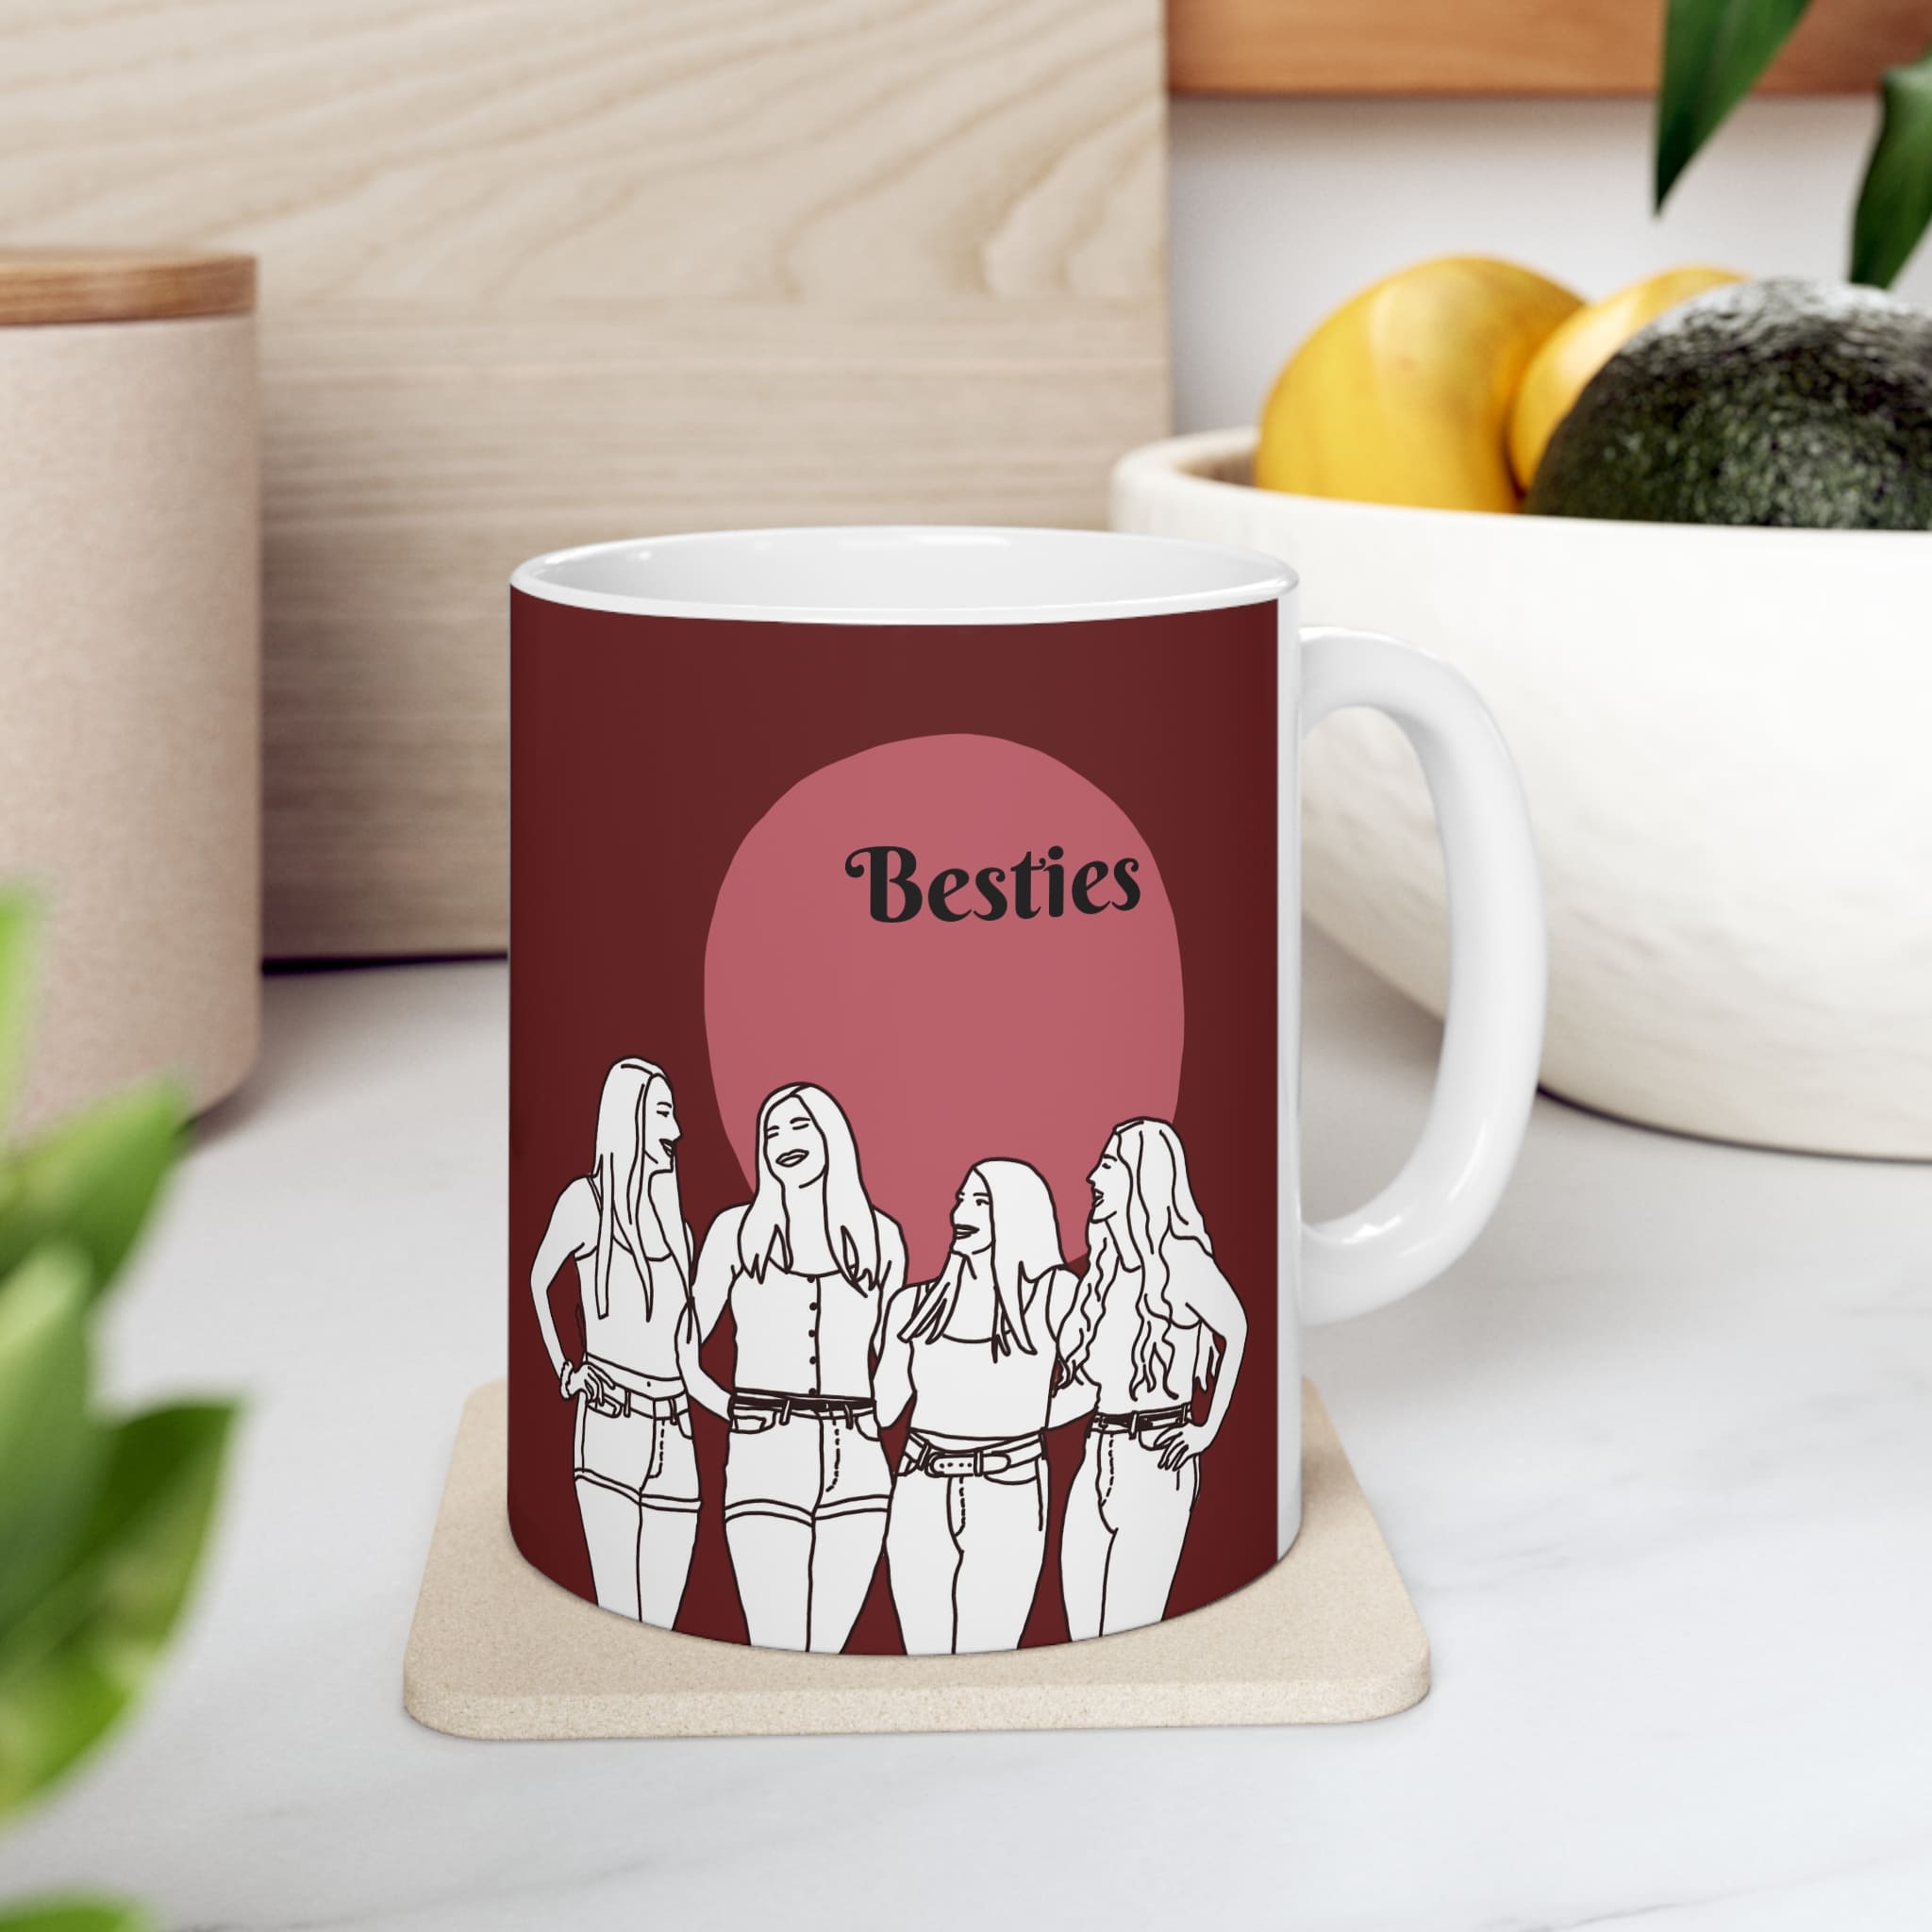 matching besties mug with custom portrait illustration from photo in fashion color blocking design stylish and cute 